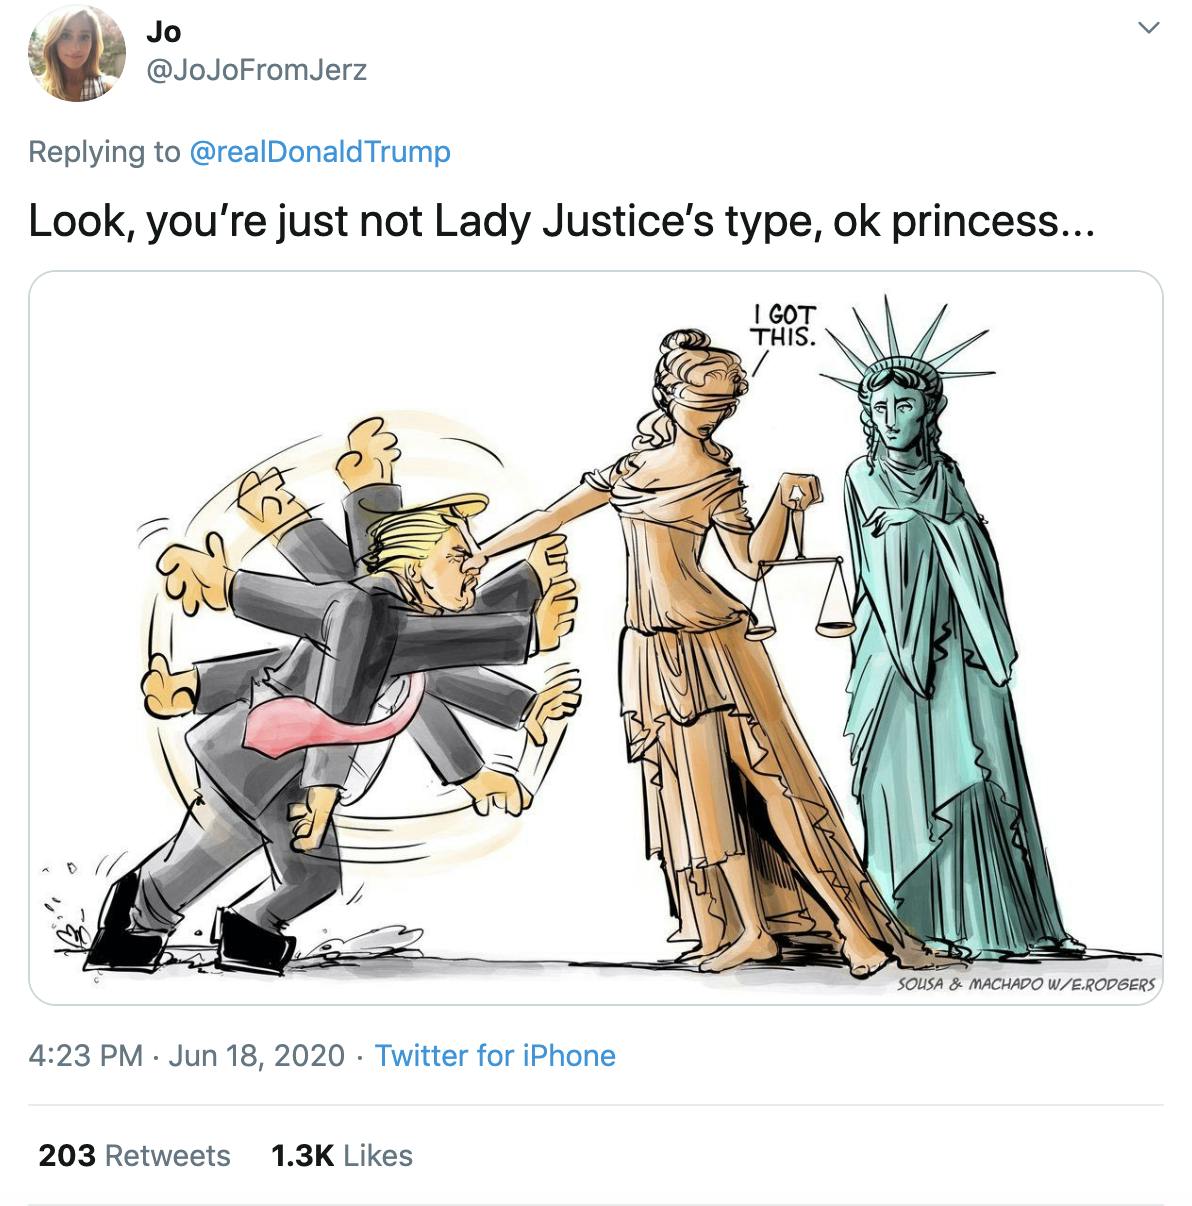 'Look, you’re just not Lady Justice’s type, ok princess...' cartoon of Lady Justice holding Trump off by his forehead and saying 'I got this' while the Statue of Liberty stands behind her